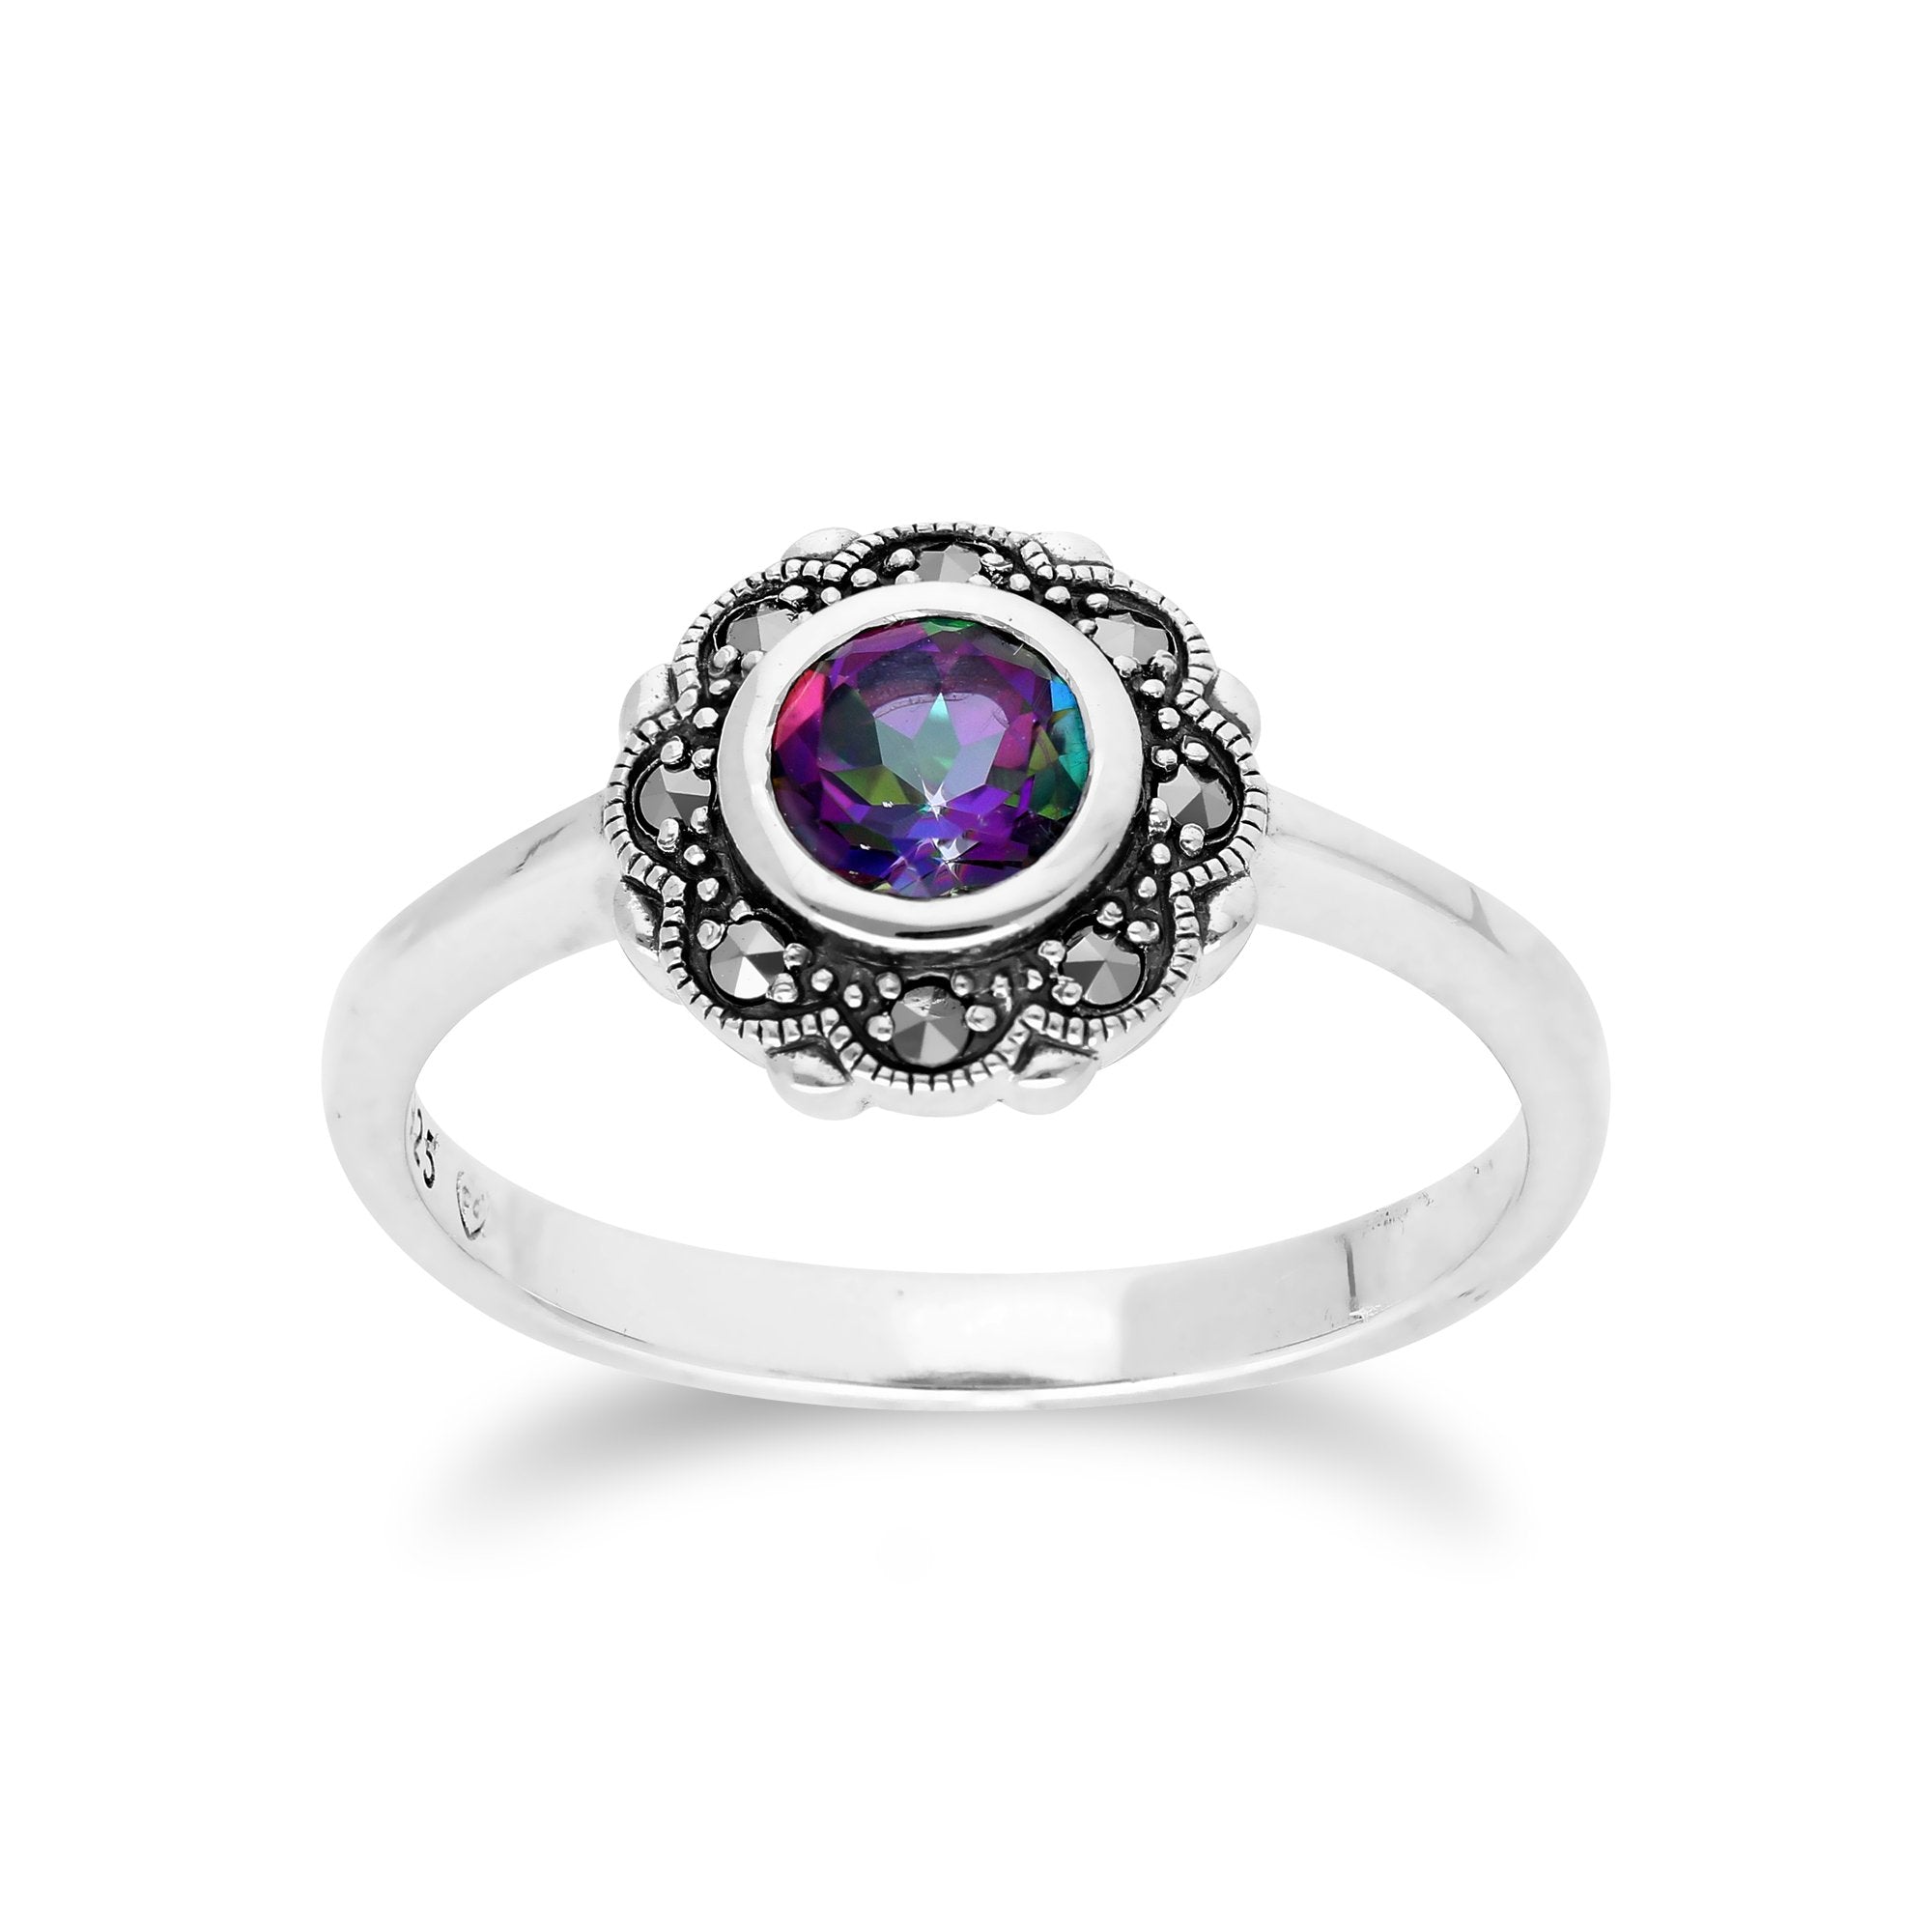 Floral Round Mystic Topaz & Marcasite Halo Ring in 925 Sterling Silver